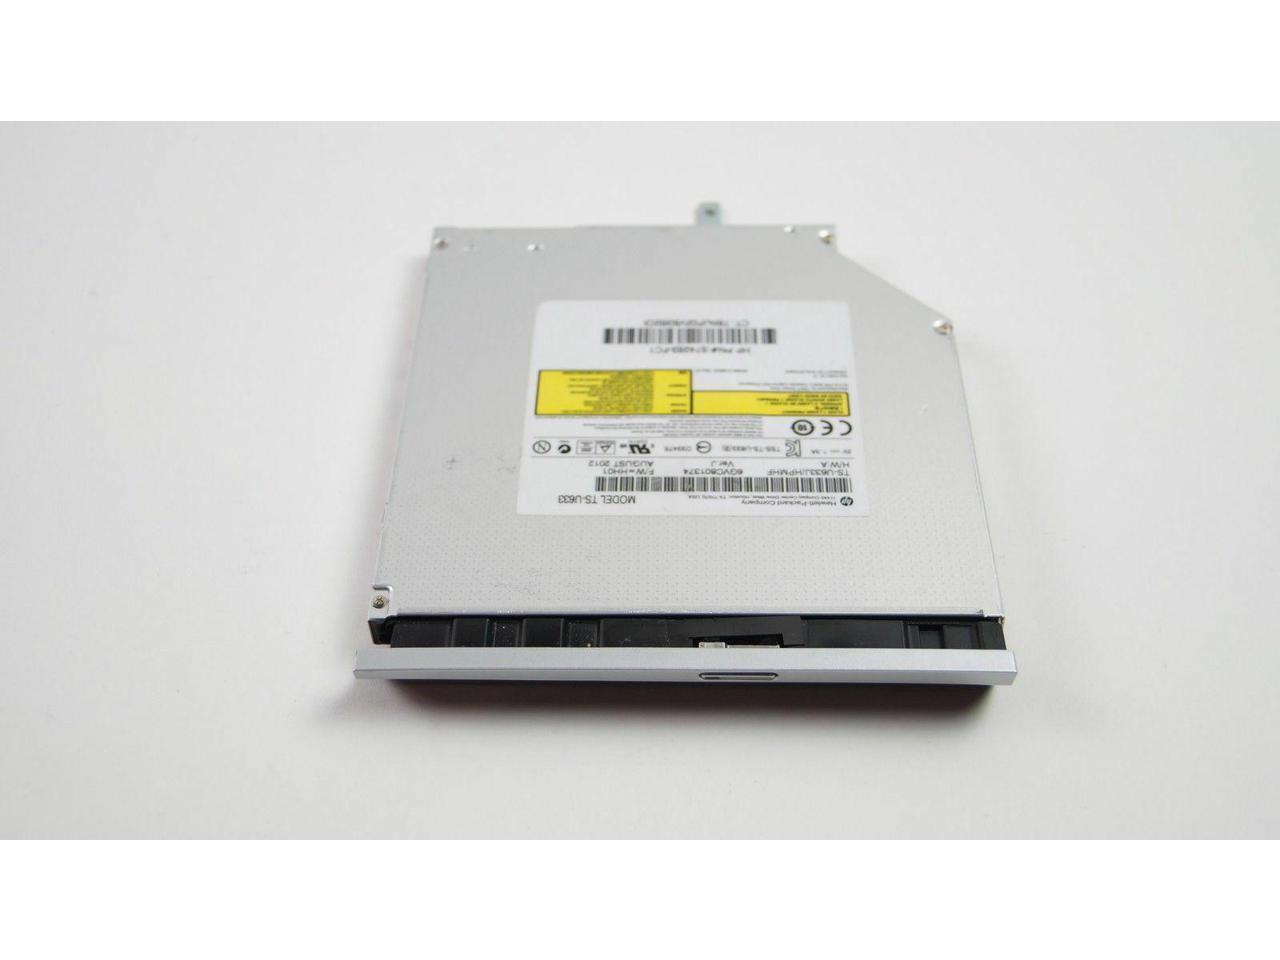 686916-001 Hp Dvd +/- Rw Optical Drive With Bezel M6-1001AX M6-1205DX TESTED